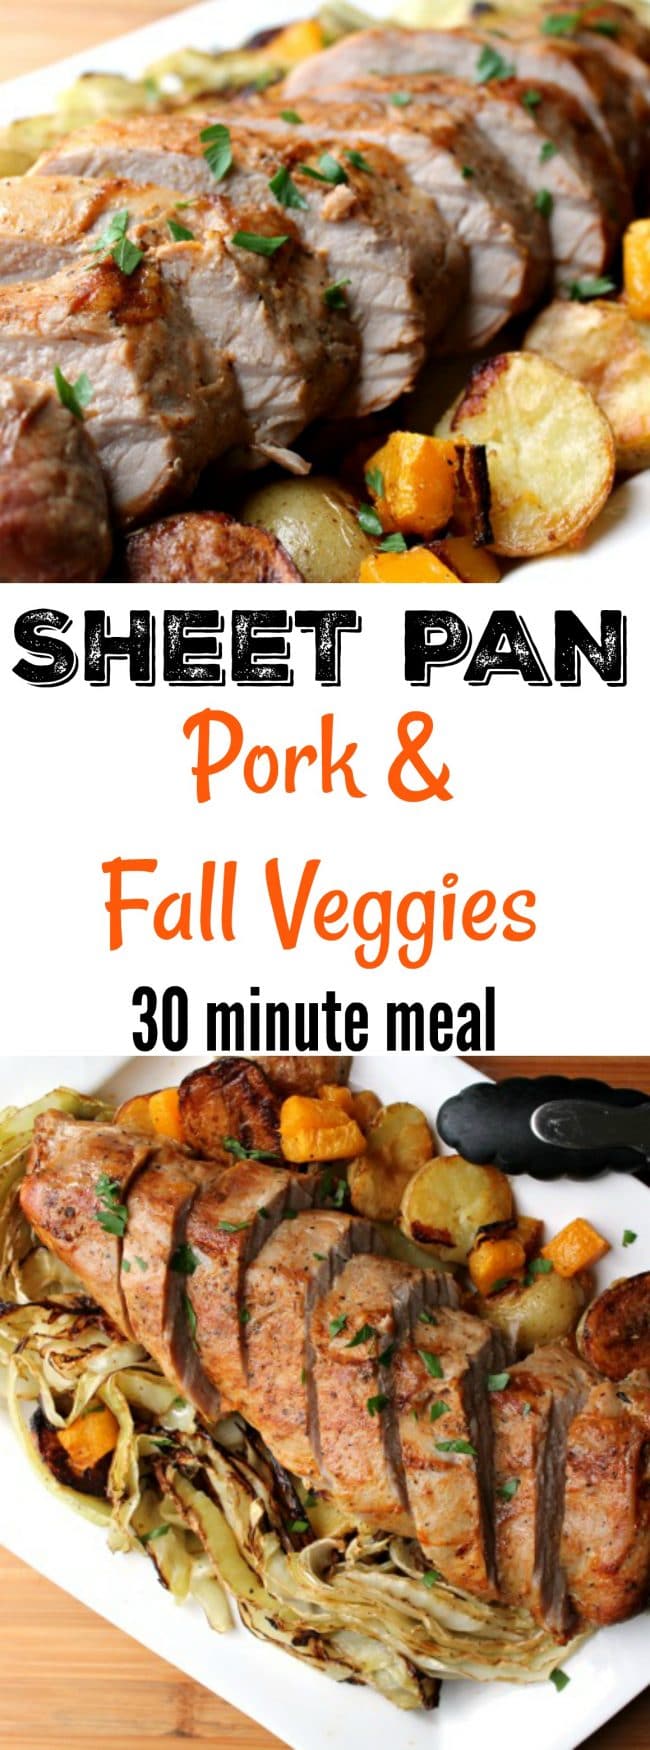 Sheet Pan Pork with Fall Veggies - ready in 30 minutes